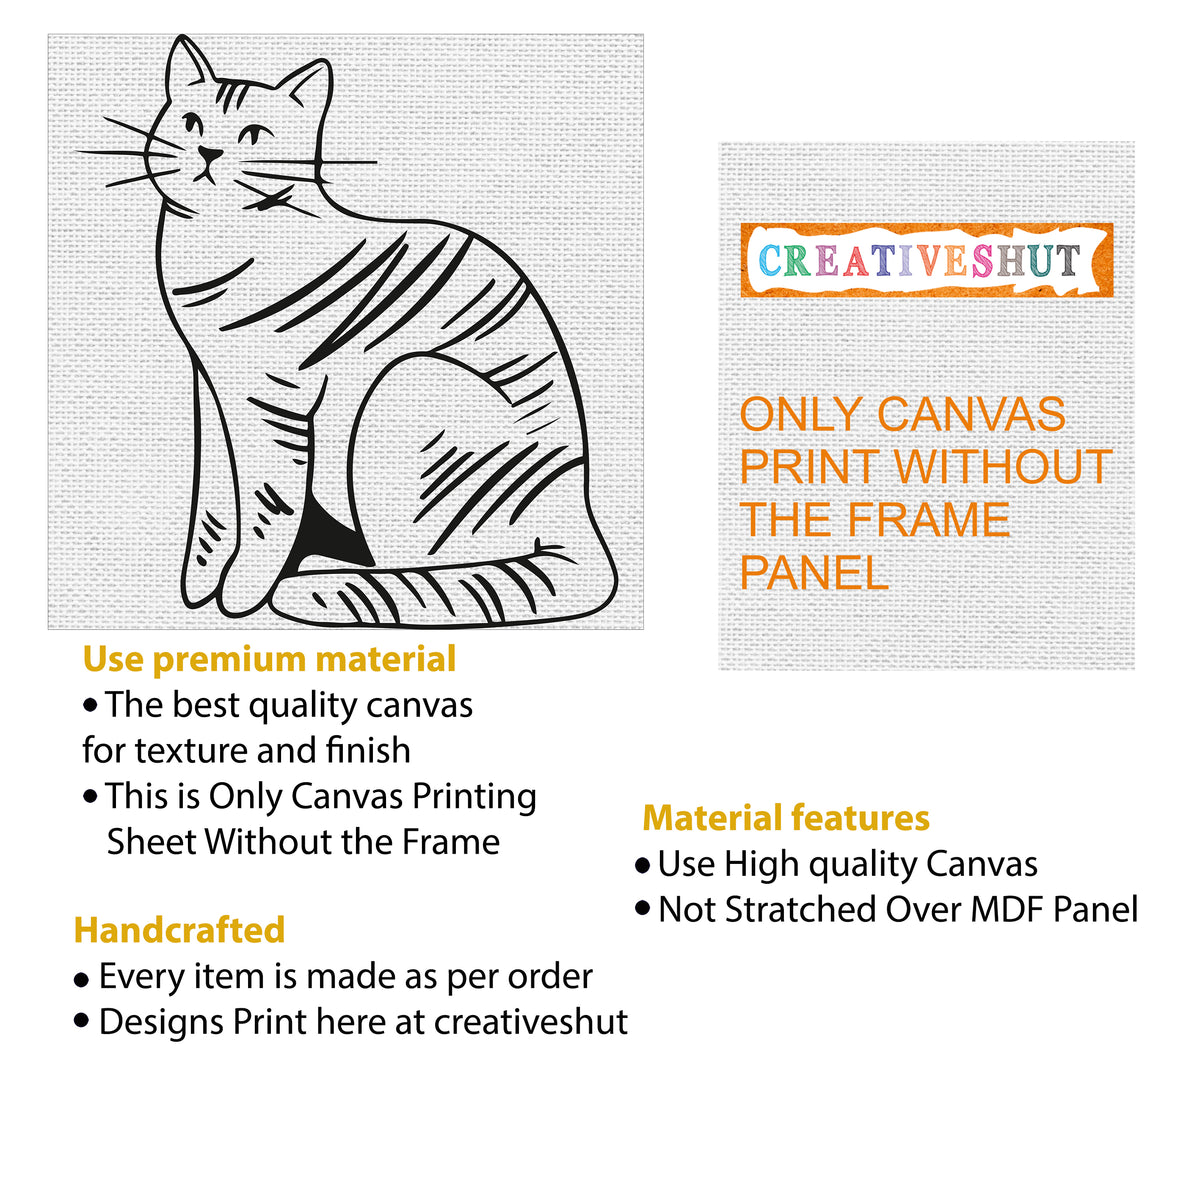 MDF and Canvas Cat DIY Framed Base for Painting